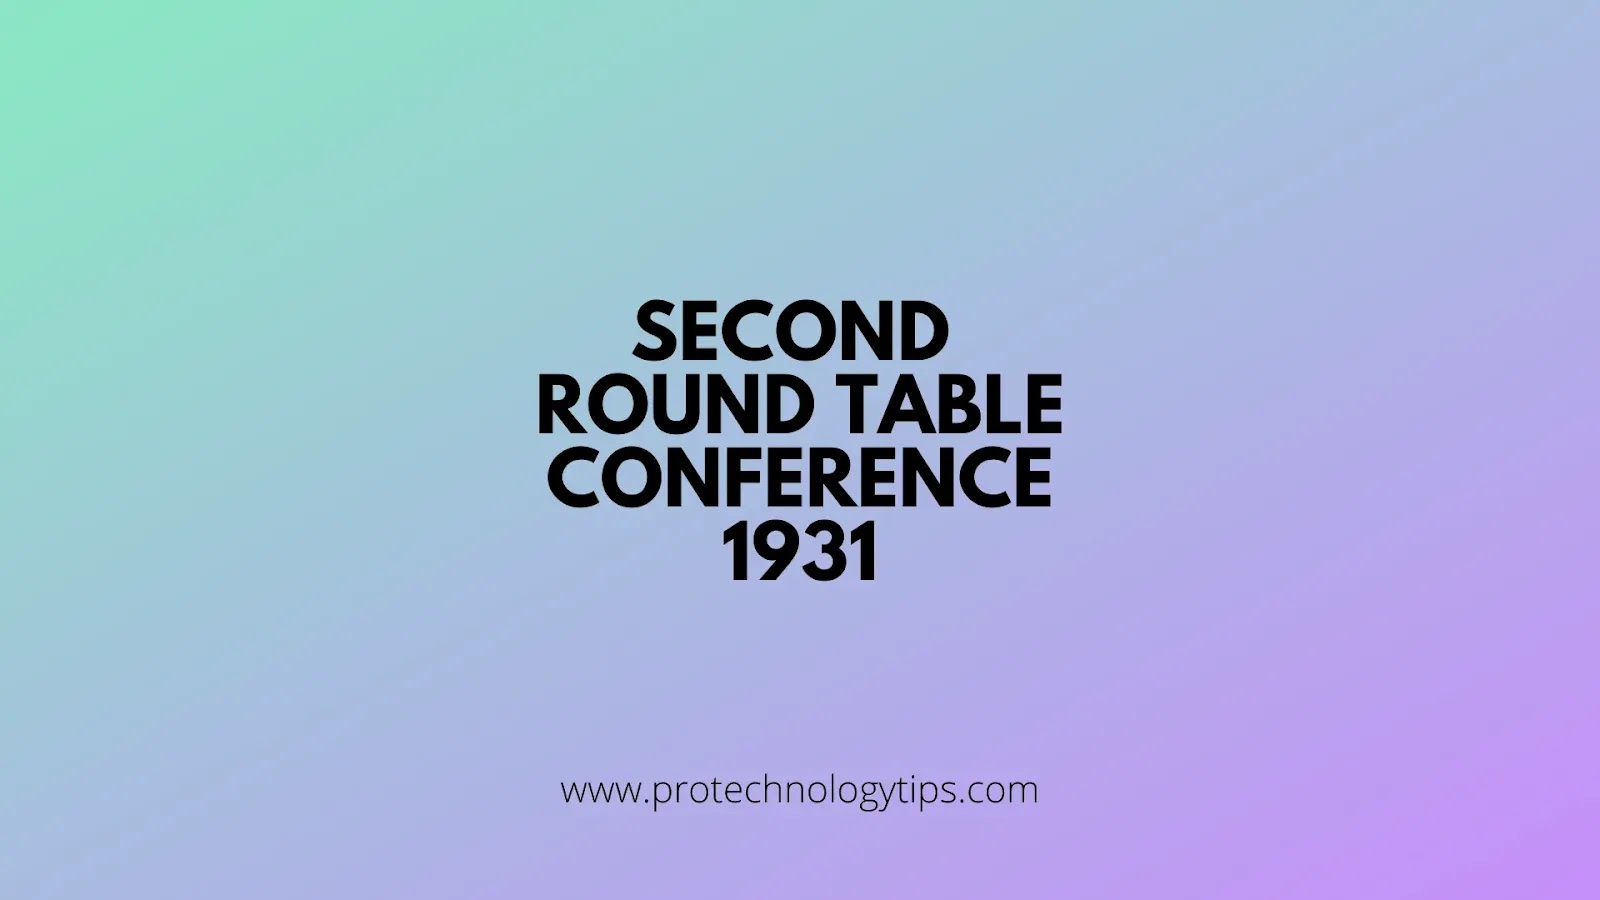 Second Round Table Conference 1931 Upsc, Second Round Table Conference Upsc